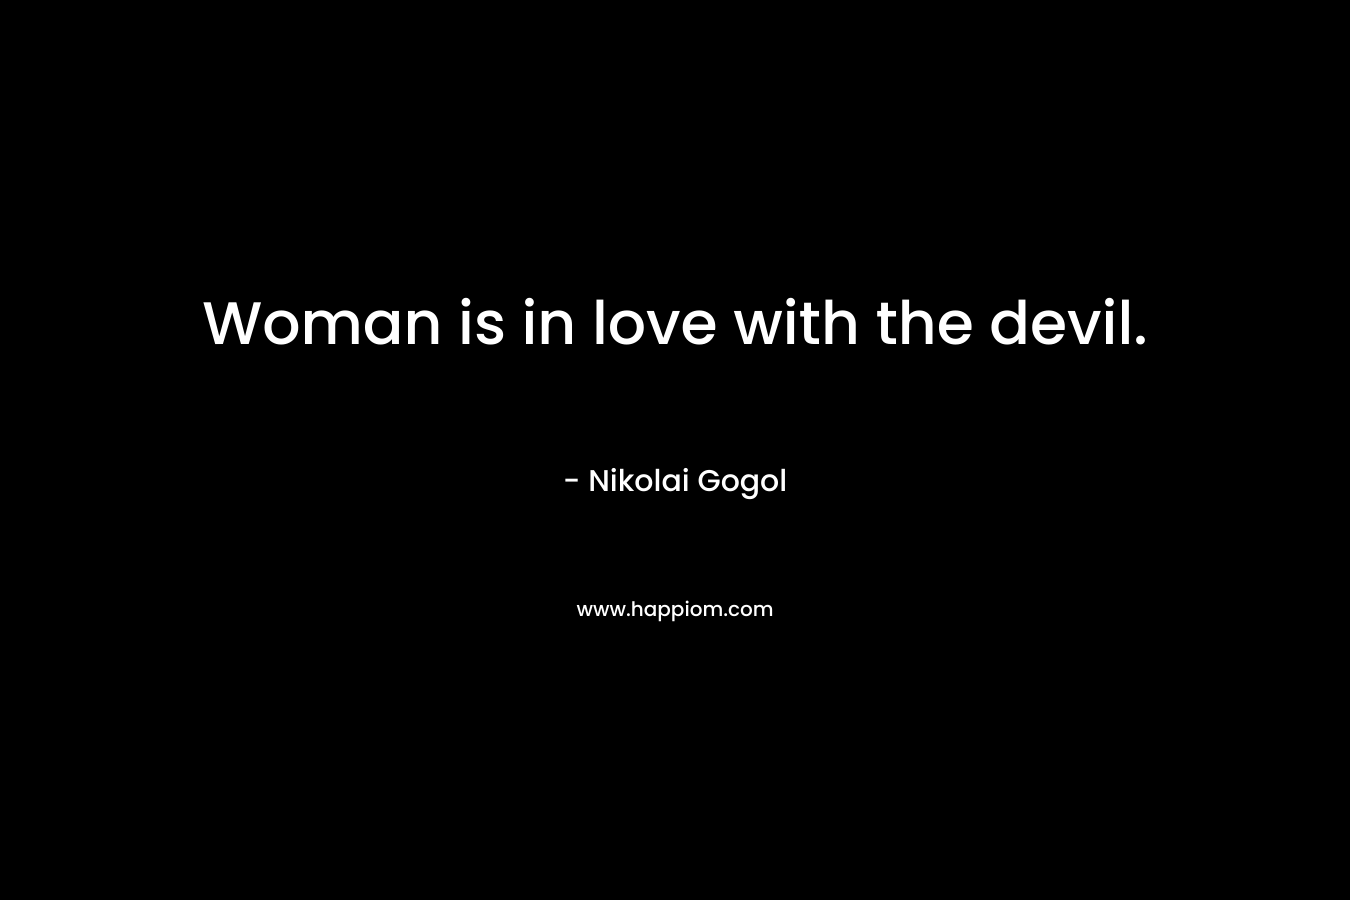 Woman is in love with the devil.